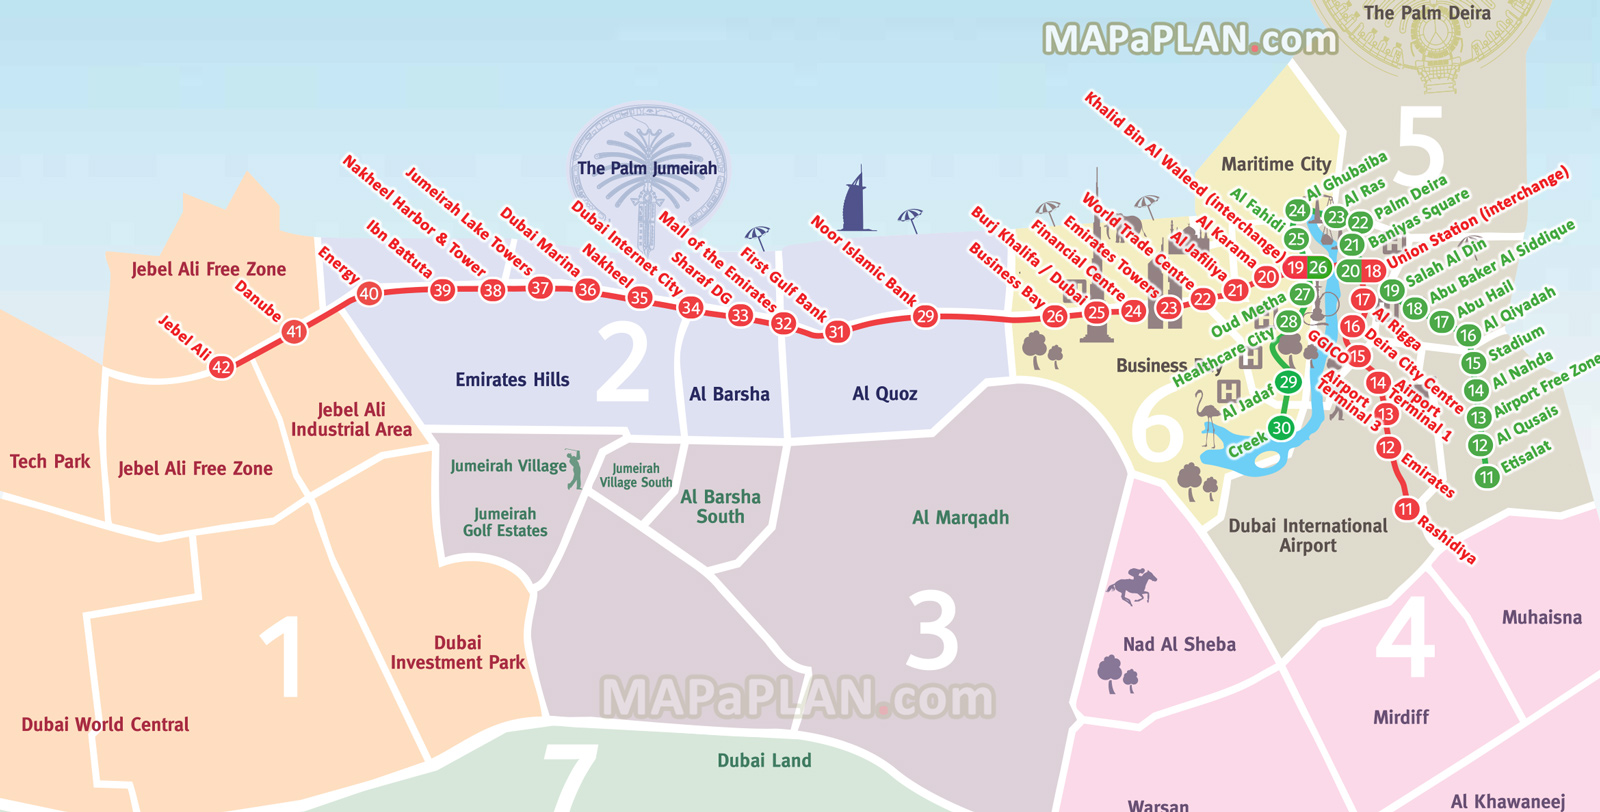 Metro RTA plan red green lines stations zones subway underground tube major sights to visit Dubai top tourist attractions map